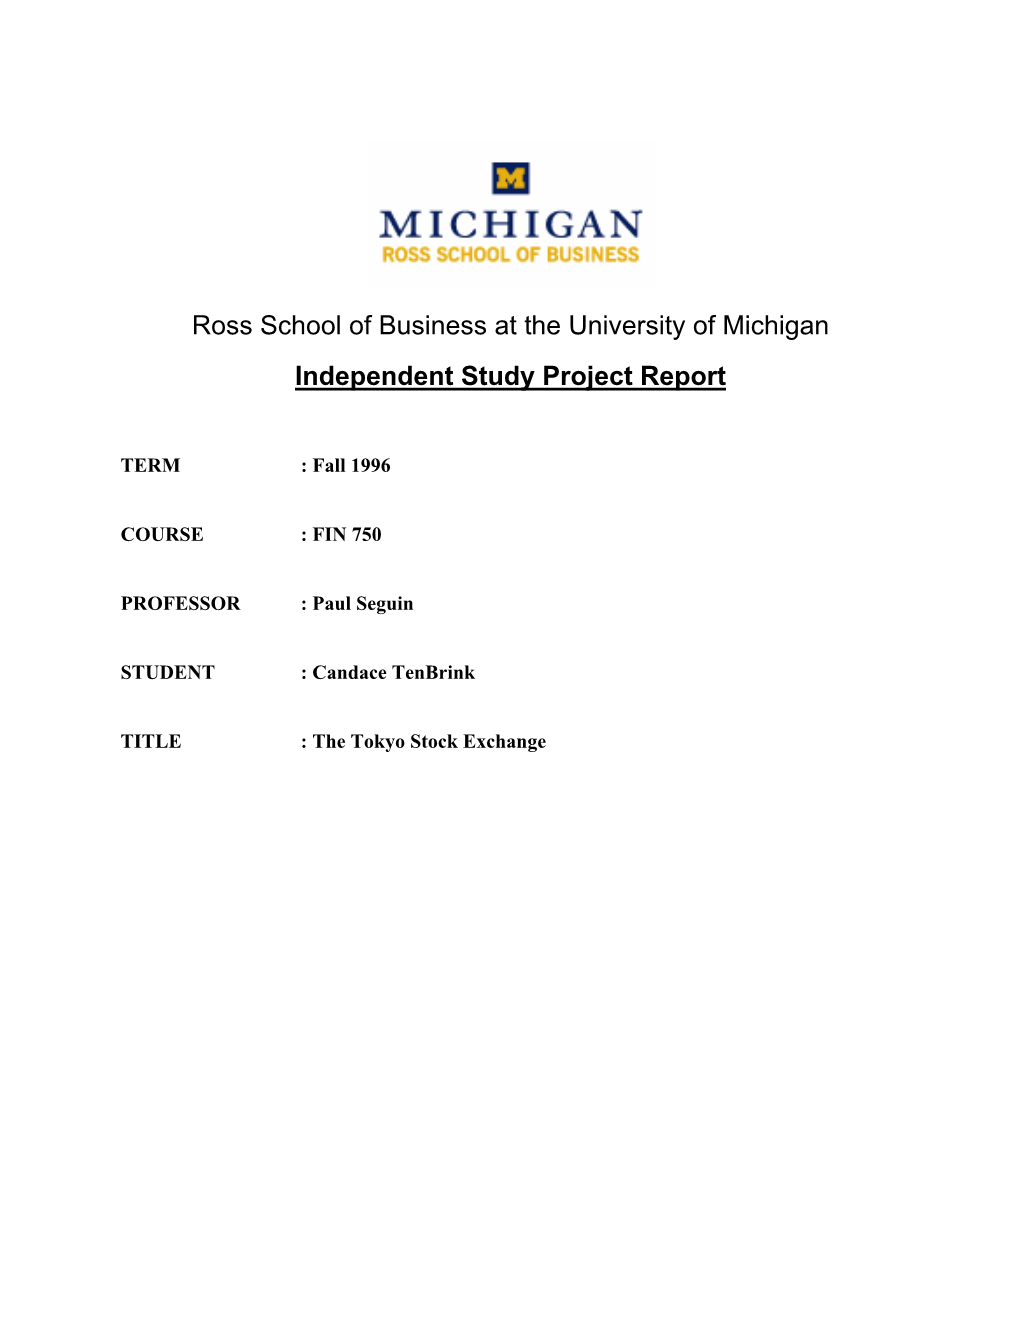 Ross School of Business at the University of Michigan Independent Study Project Report